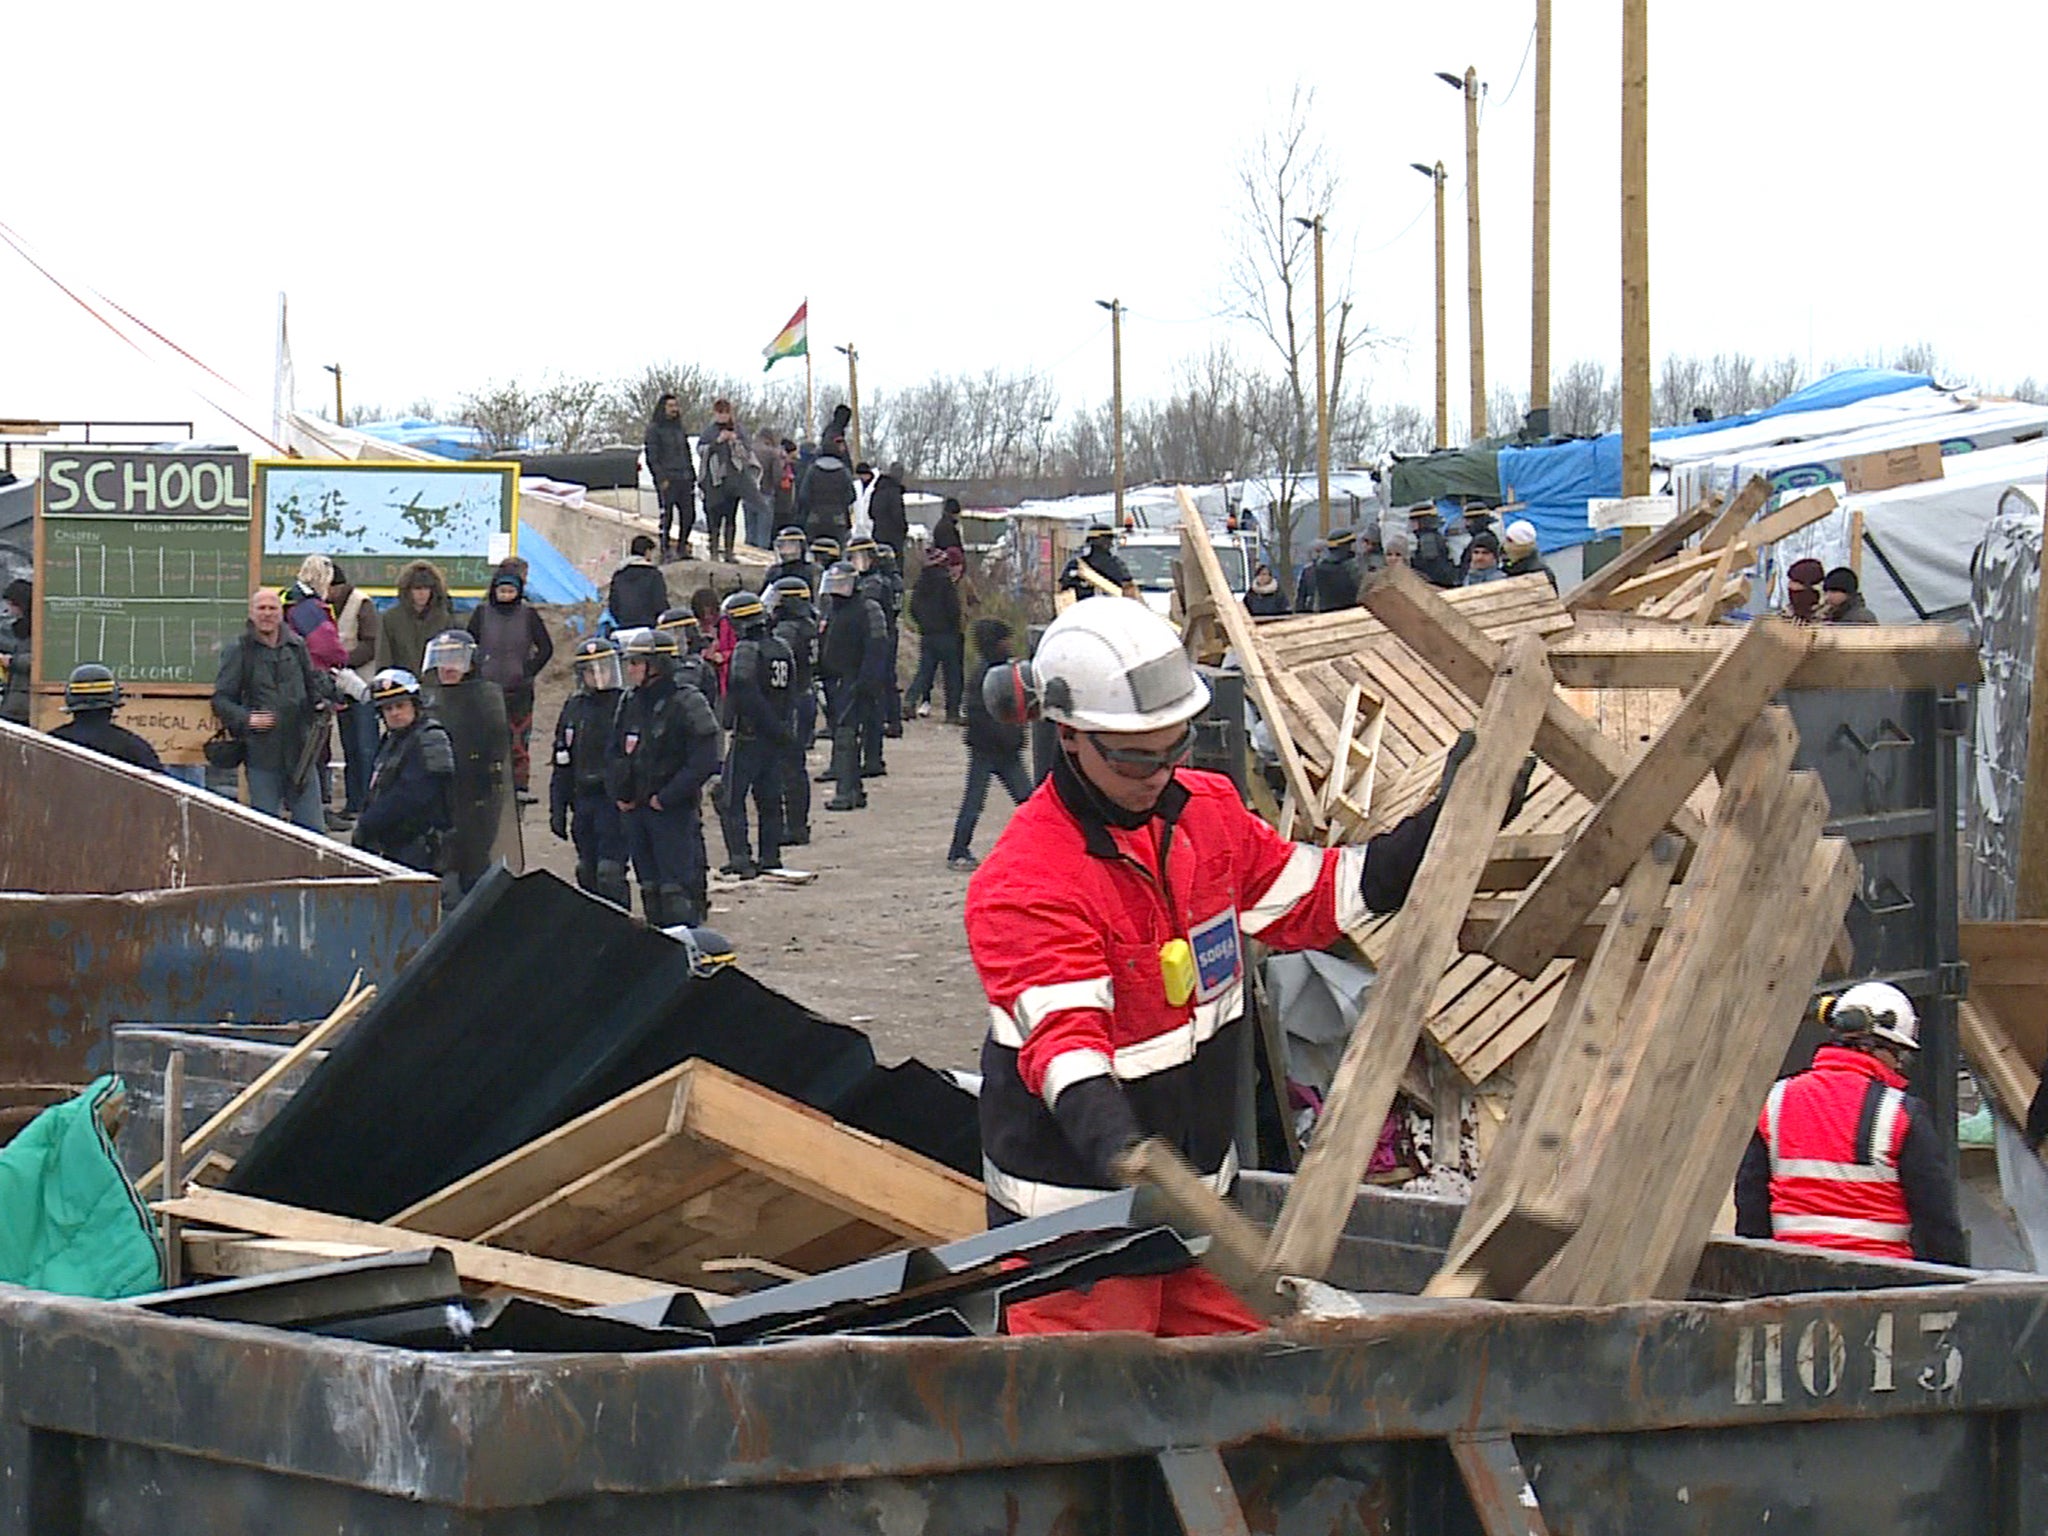 The Government plans to dismantle most of the camp by the end of March